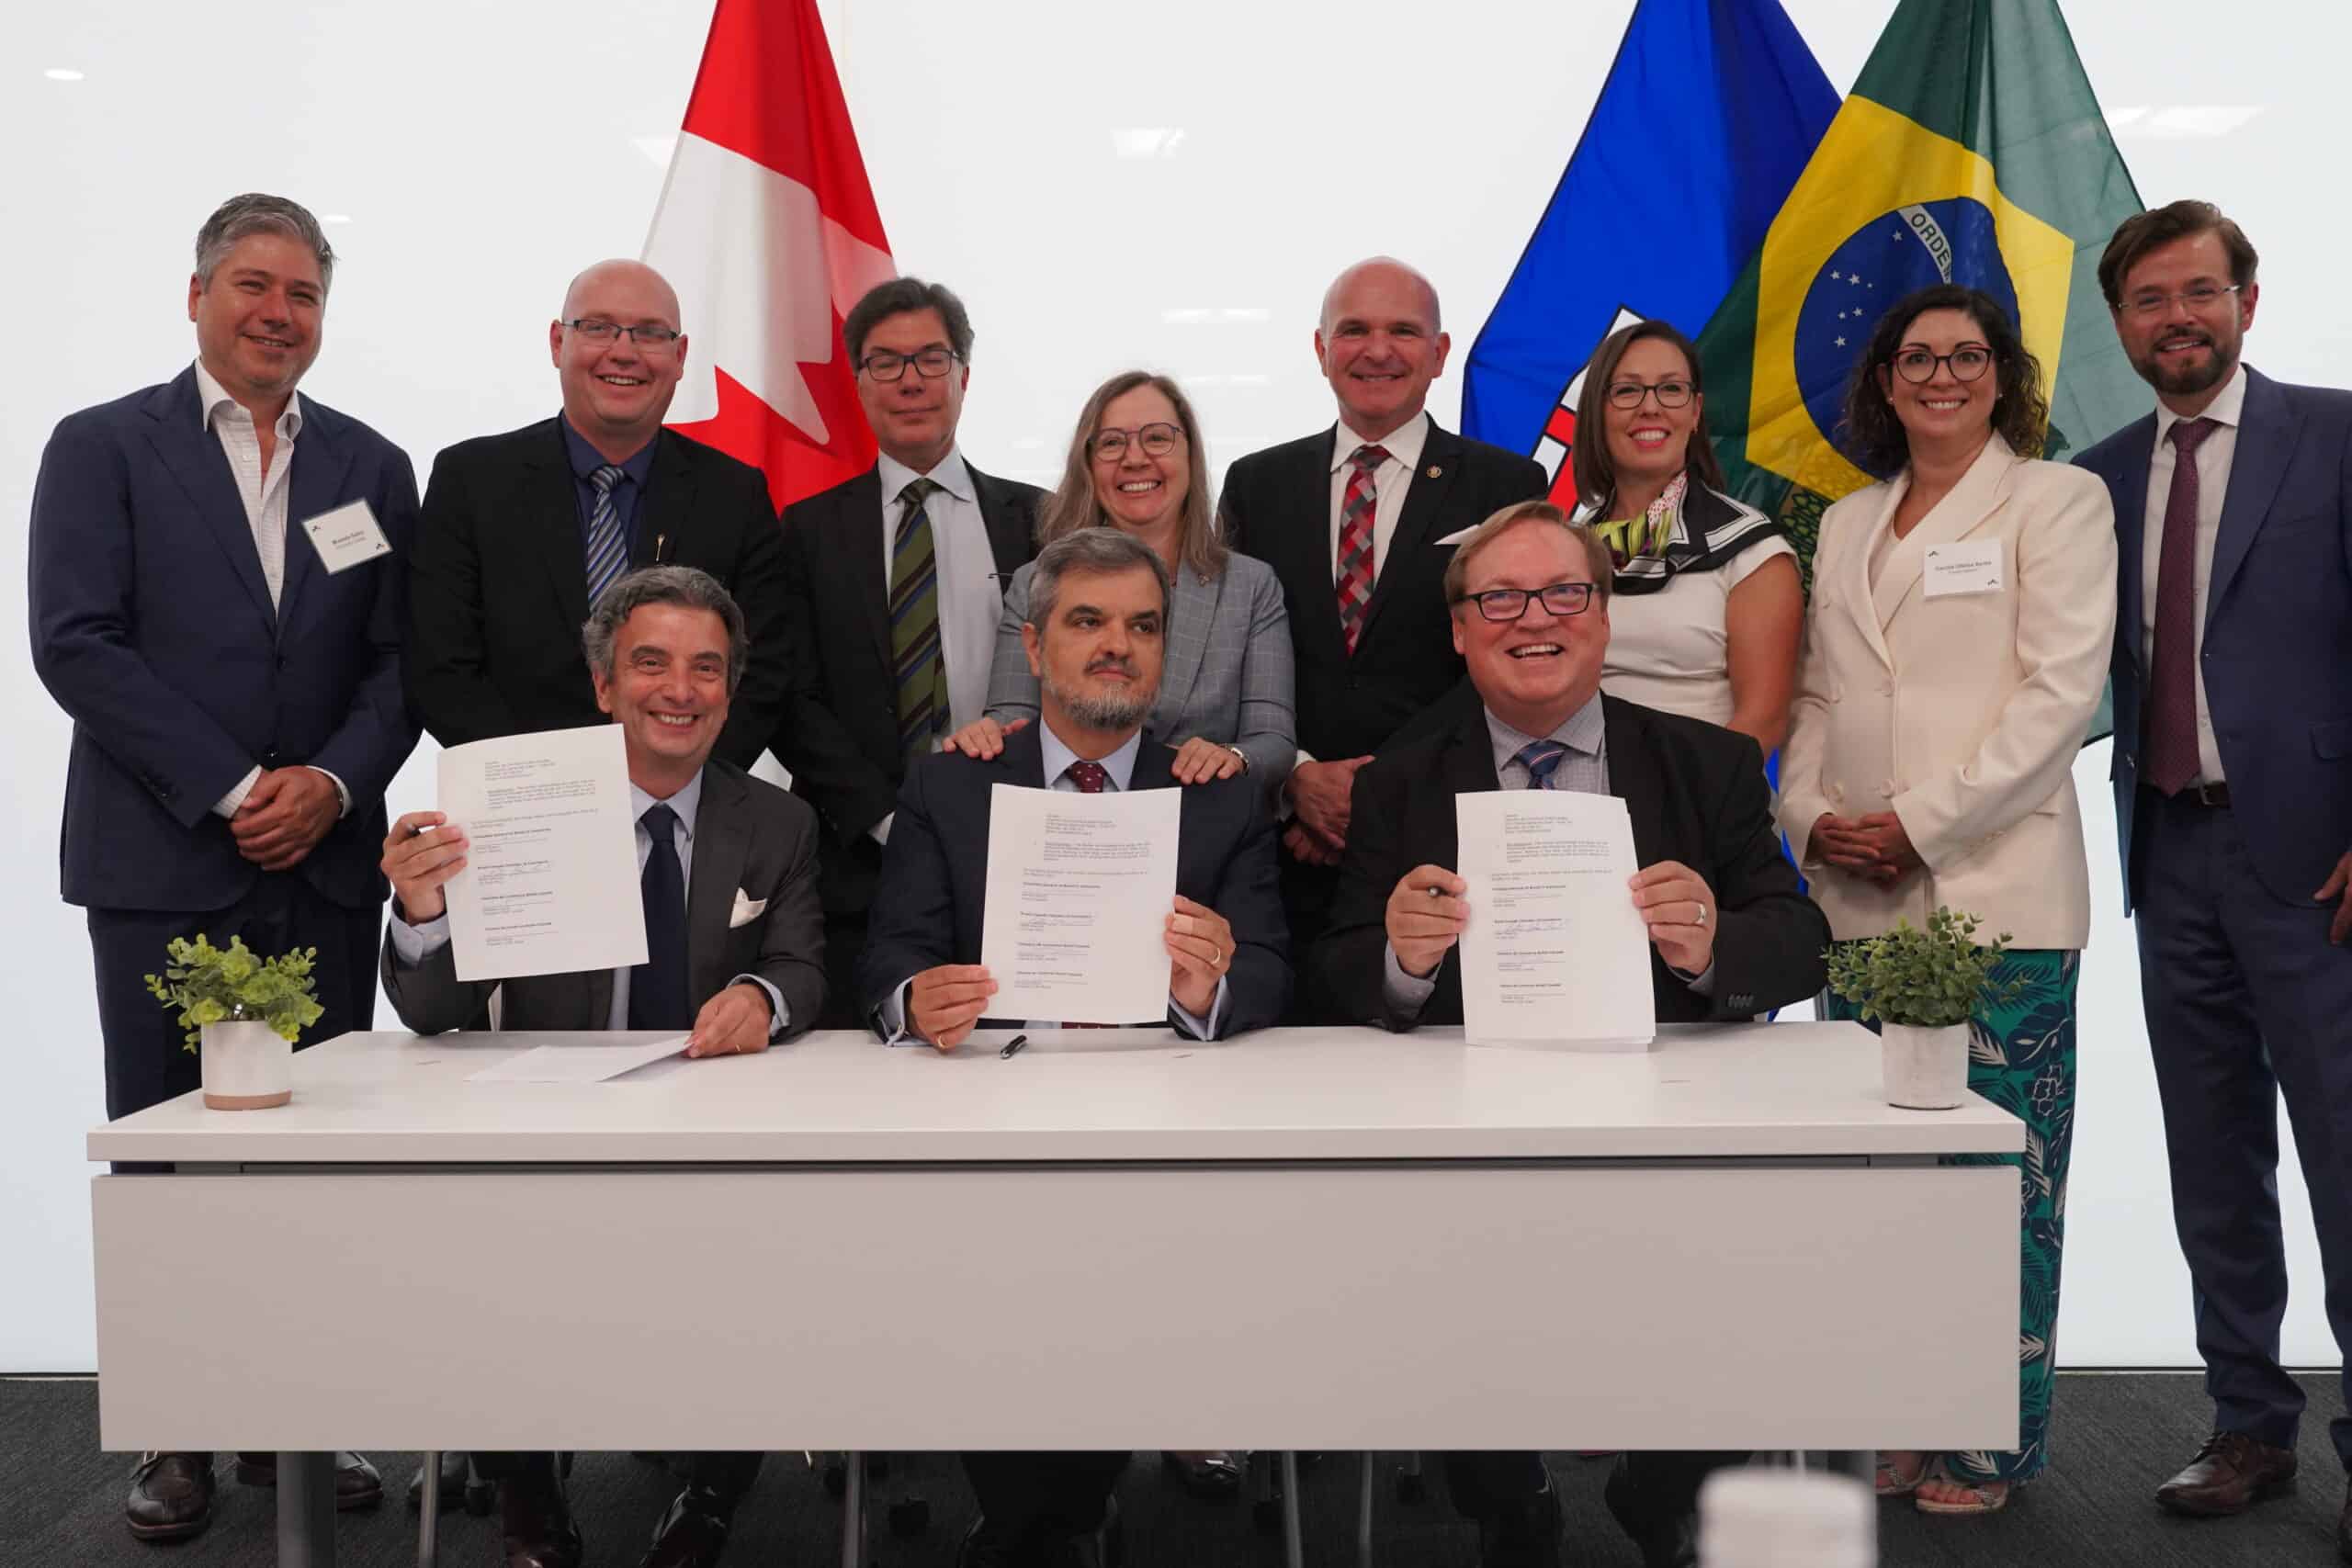 Group photo at the Brazil-Alberta Opportunities forum in partnership with the CCBC, BCCC and Edmonton Global in August. Edmonton is positioning as launch pad for Brazilian companies expanding to Canada